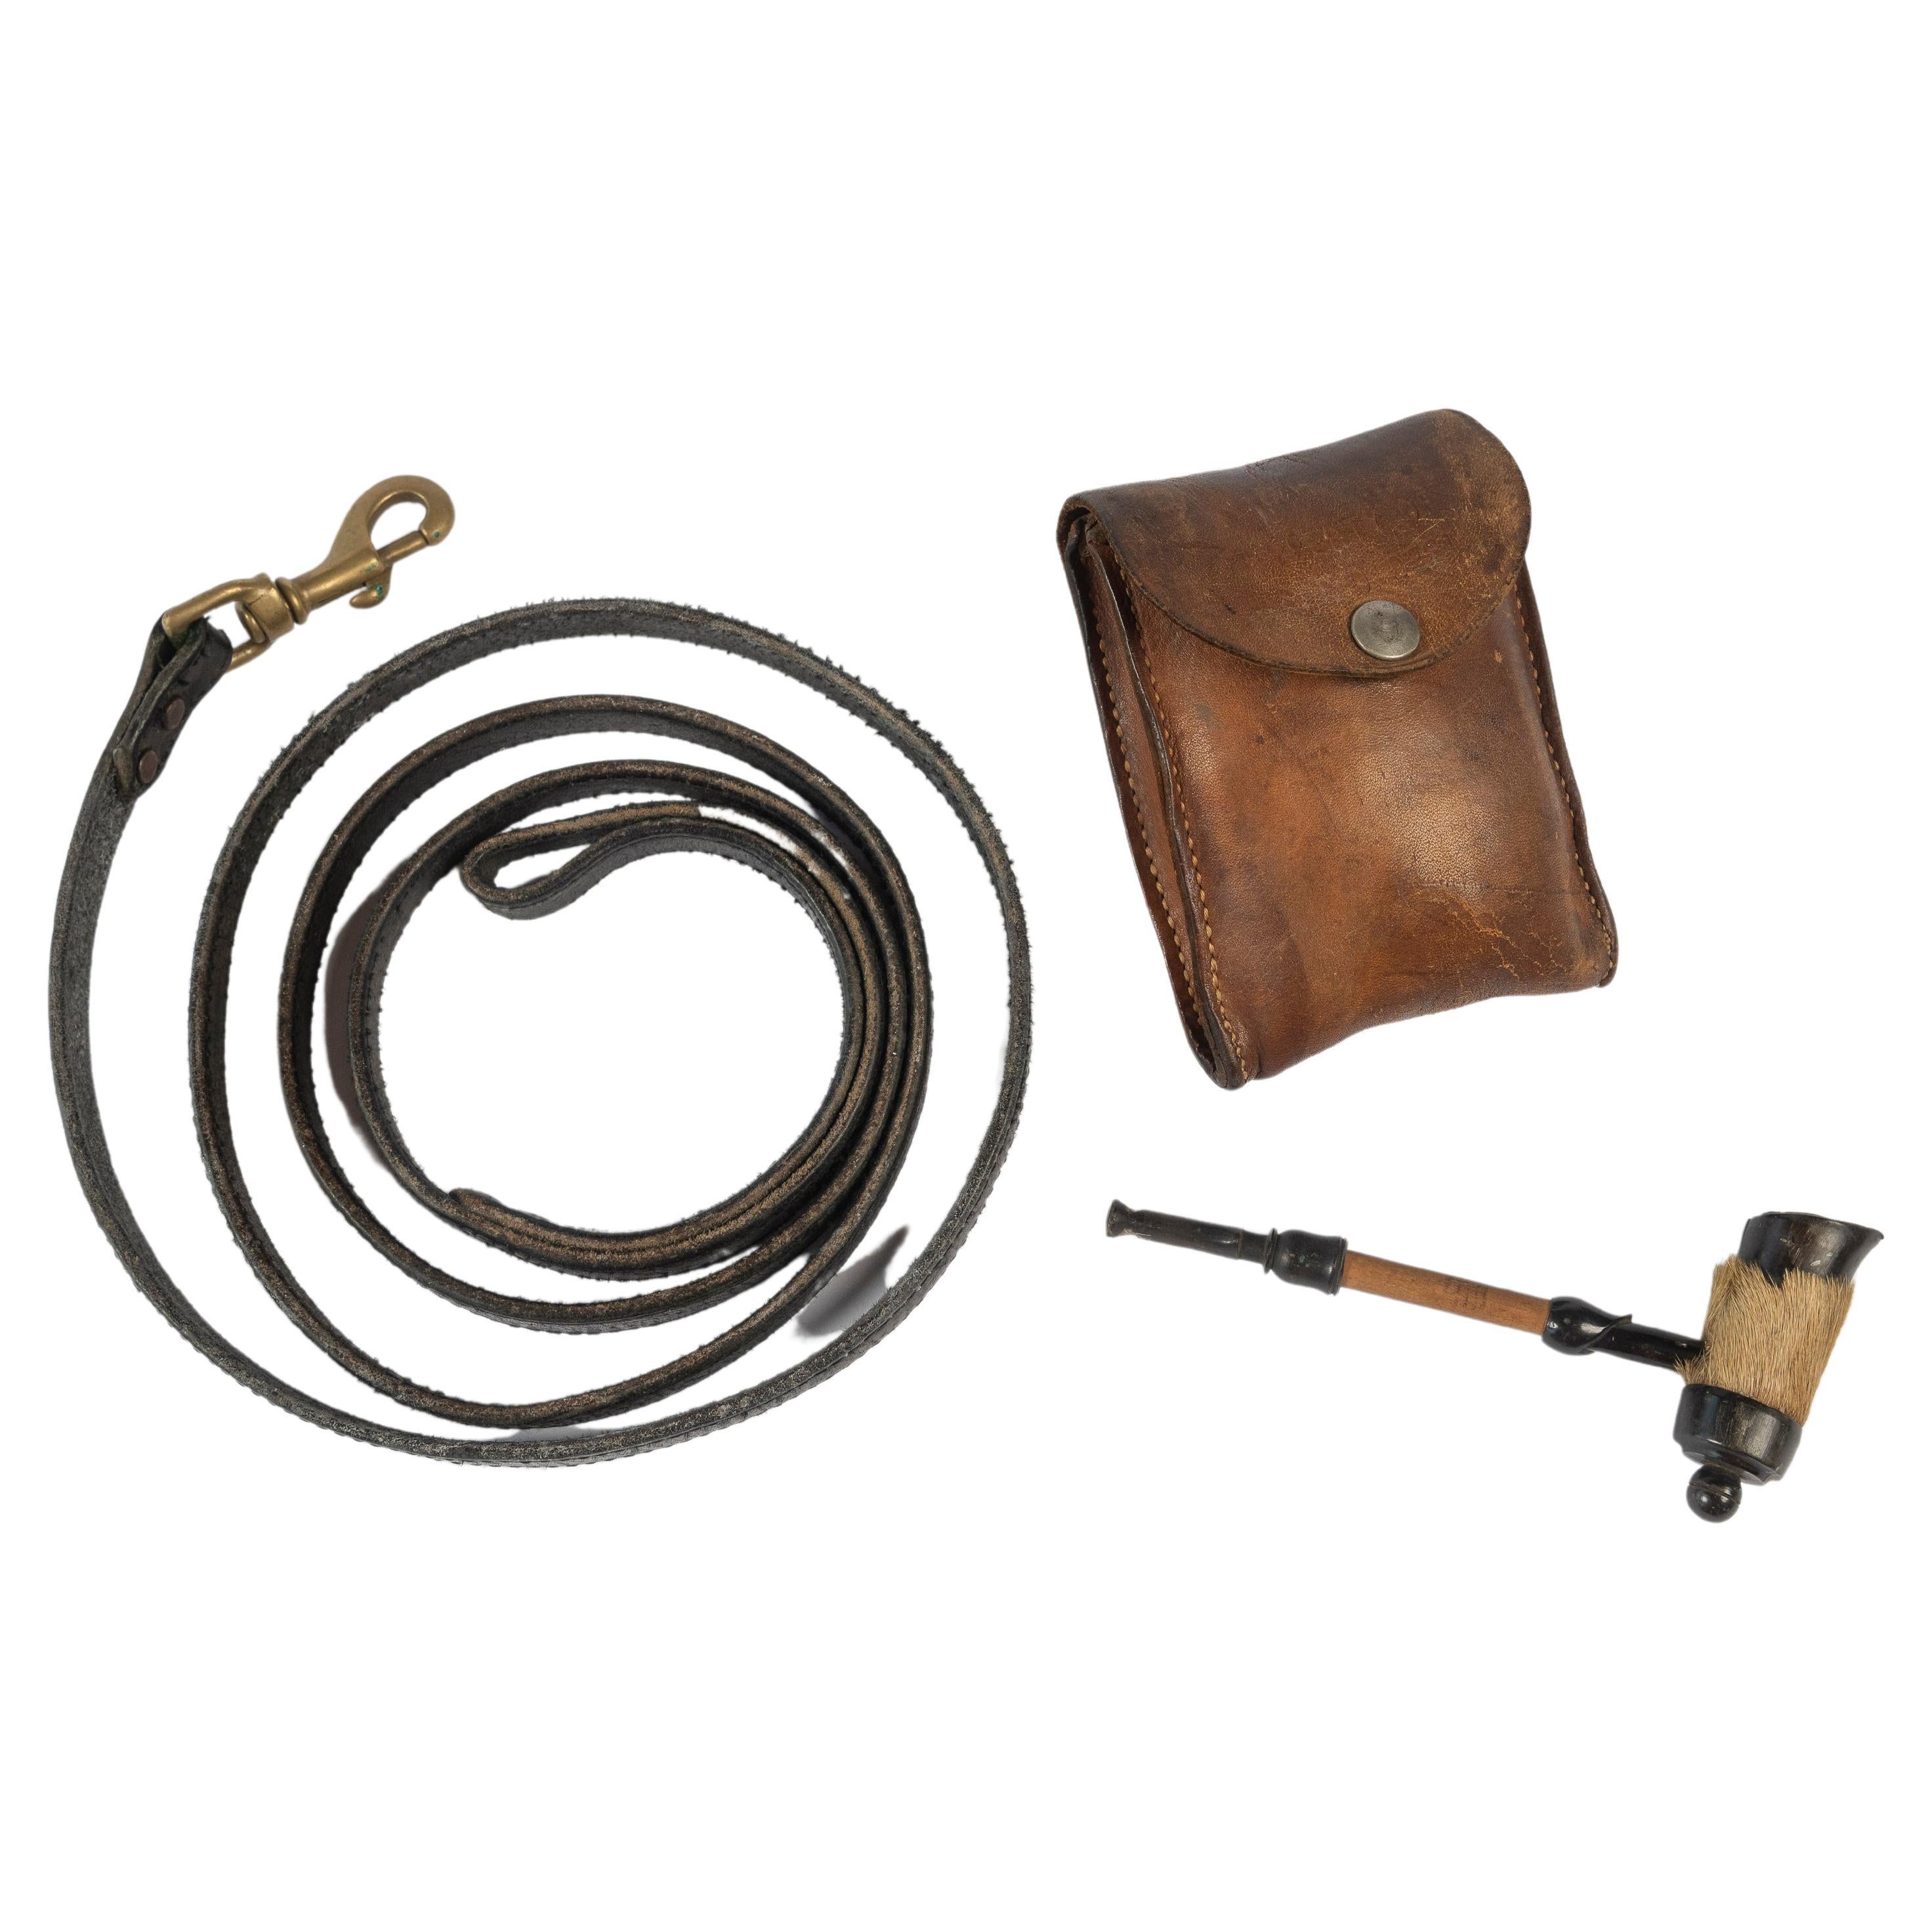 Vintage Hoofed Pipe, Leather Pouch and Leather Dog Lead, Early 20th Century